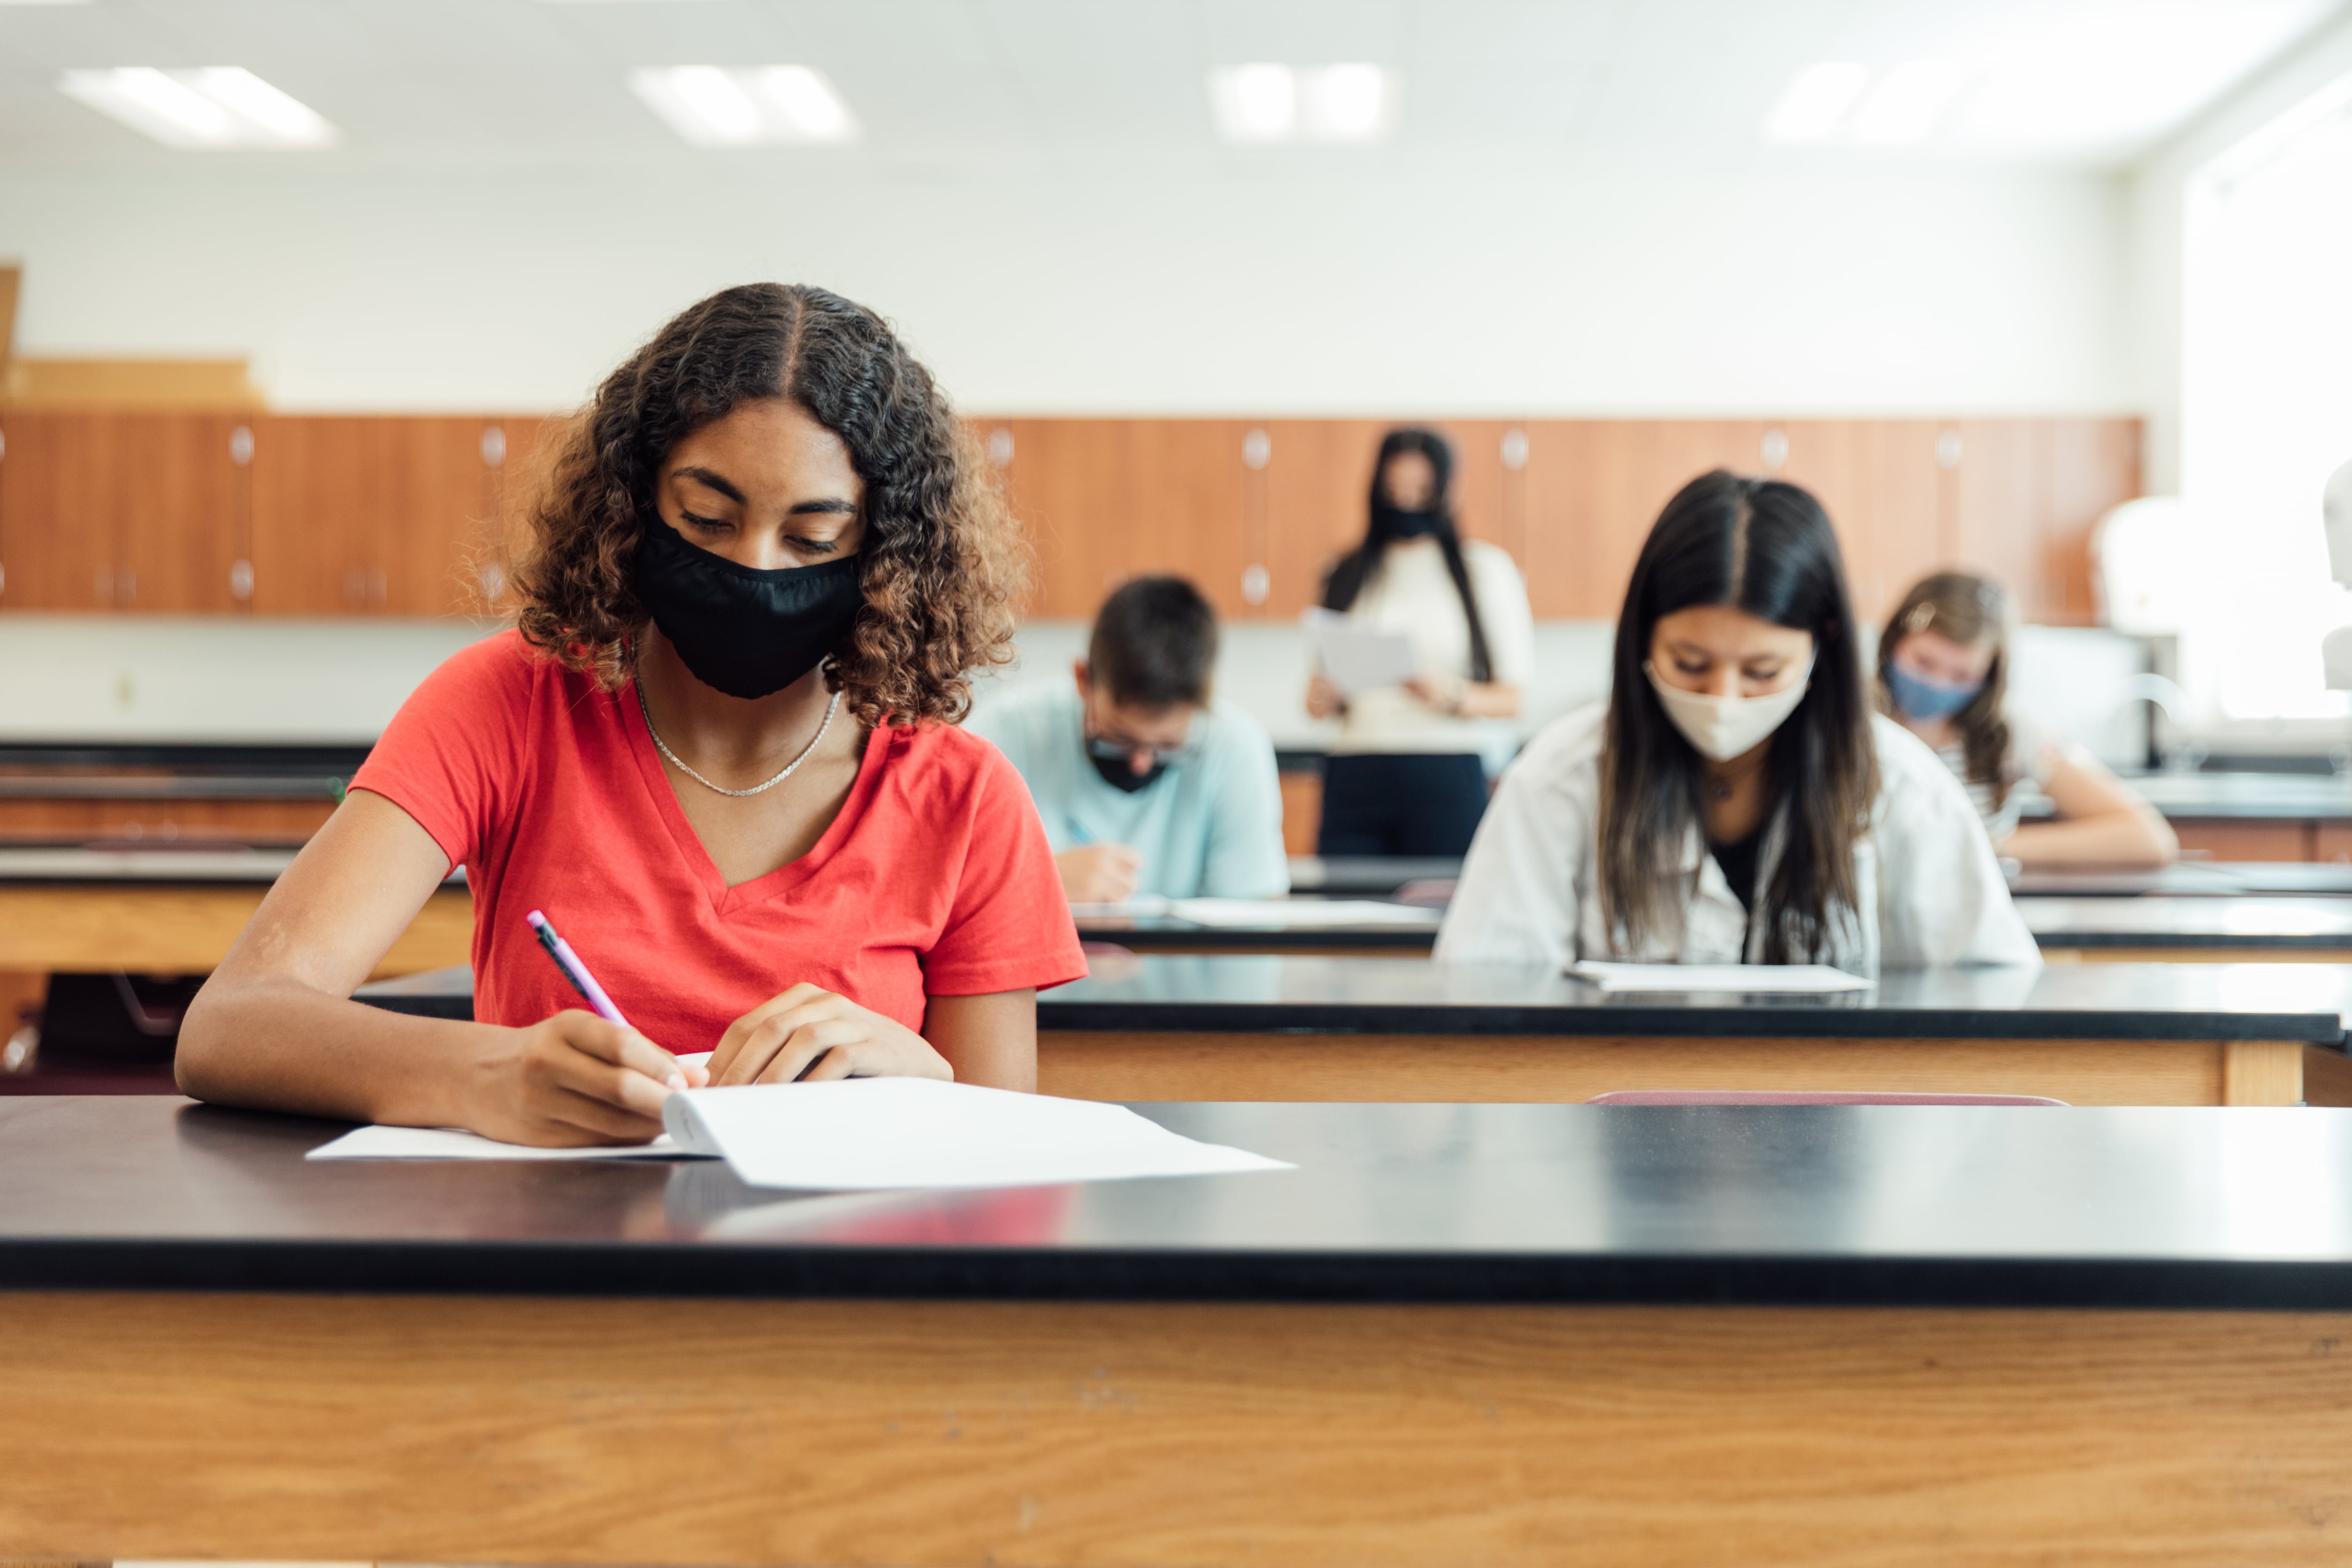 Masked high school students sit separated in rows of lab desks in a classroom.